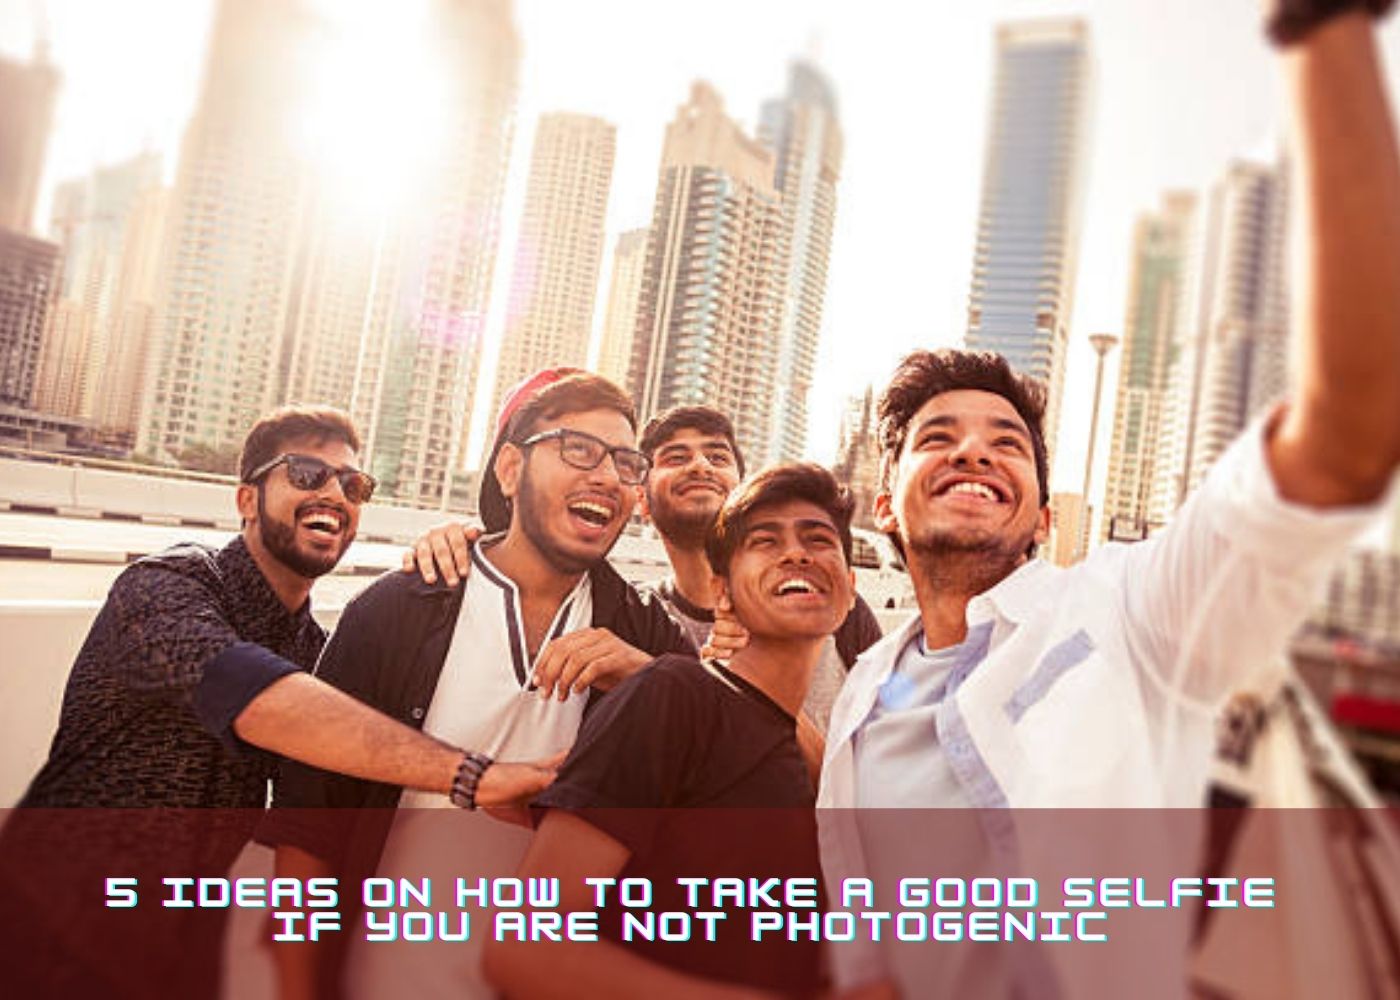 5 Ideas on How to Take a Good Selfie If You Are Not Photogenic 